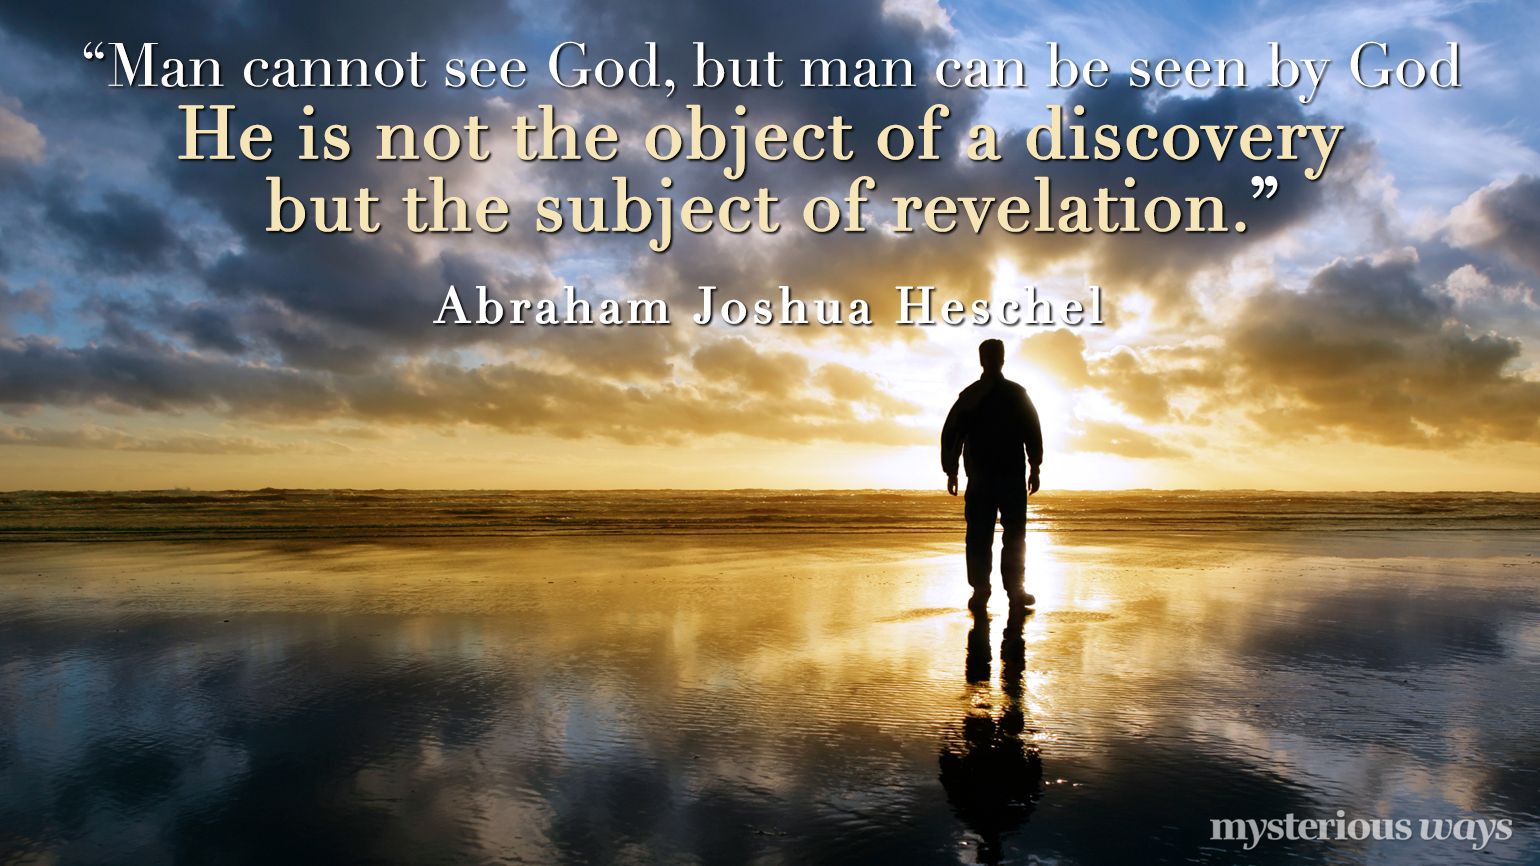 “Man cannot see God, but man can be seen by God. He is not the object of a discovery but the subject of revelation.”